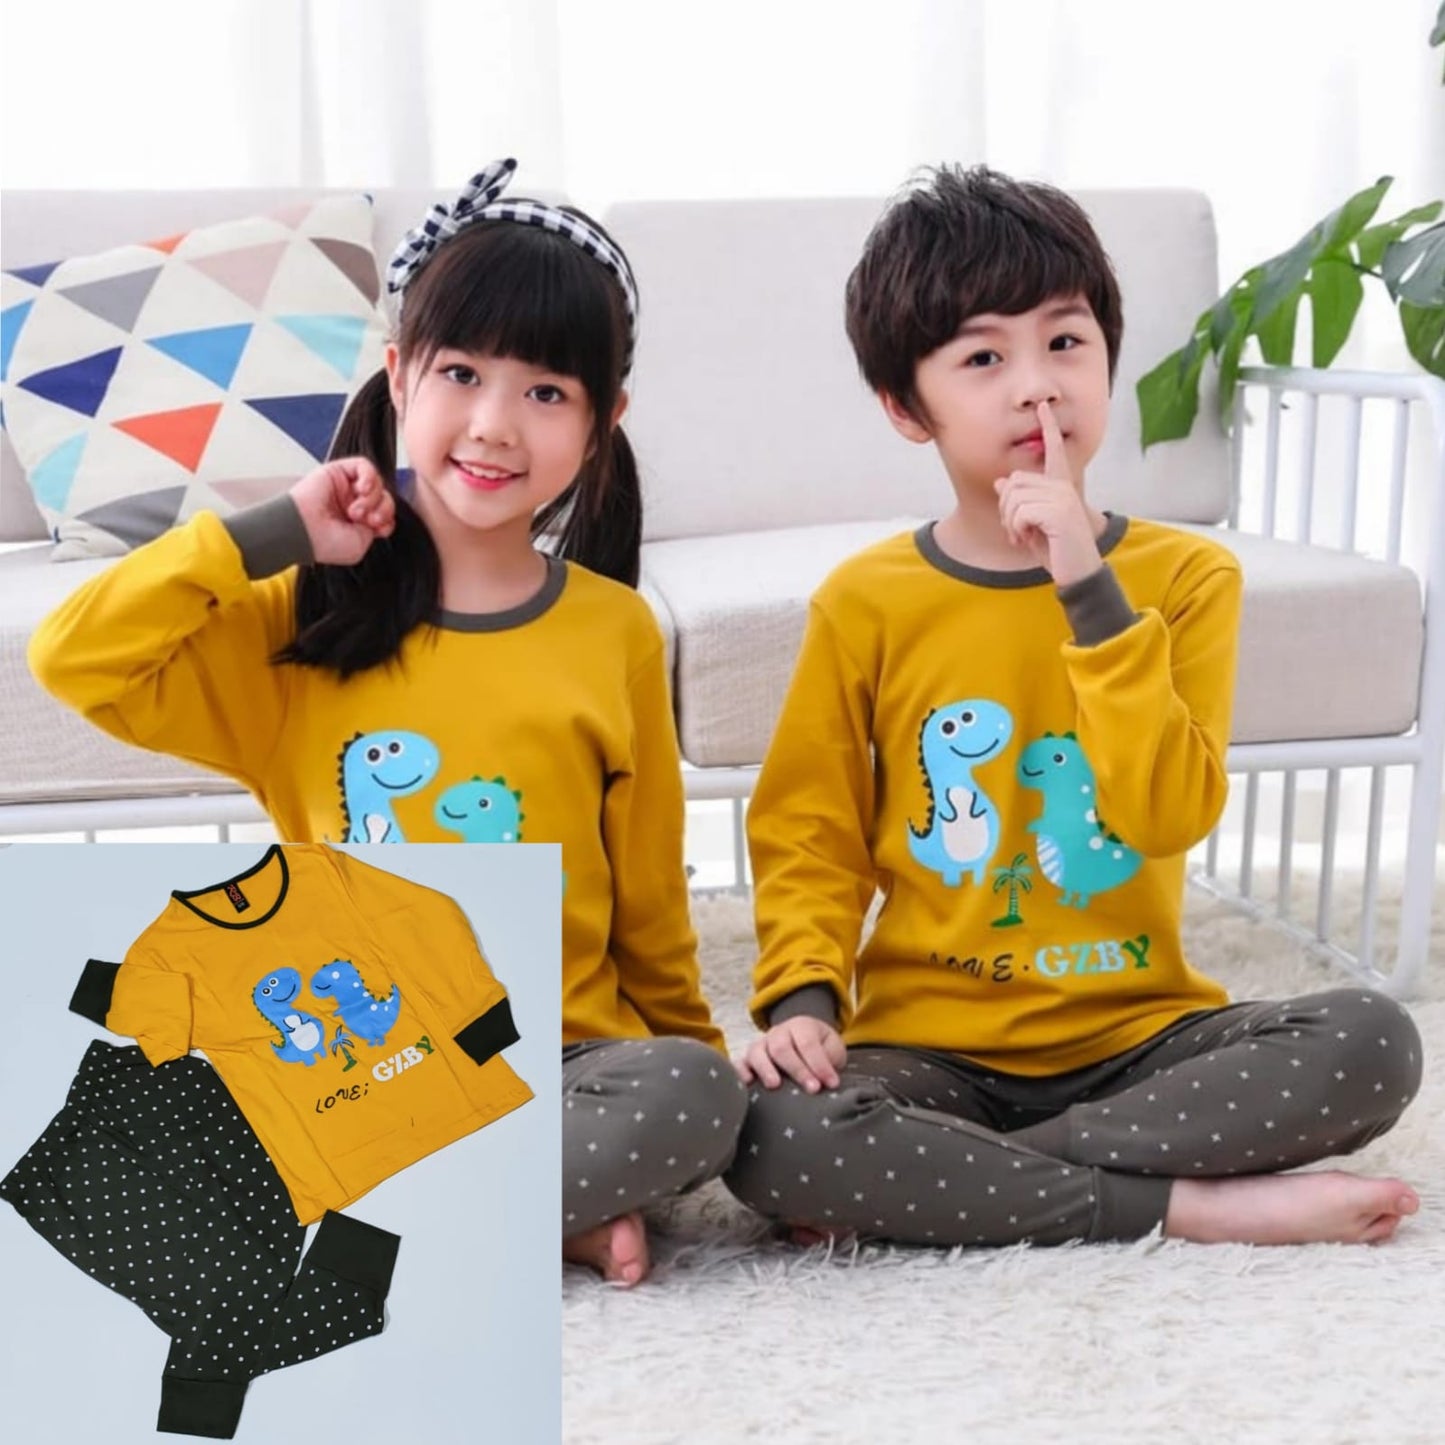 Baby or Baba Yellow Dinosaur with Dotted Pajama Print Full Sleeves Night Suit for Kids (1 Pcs) (RX-125)